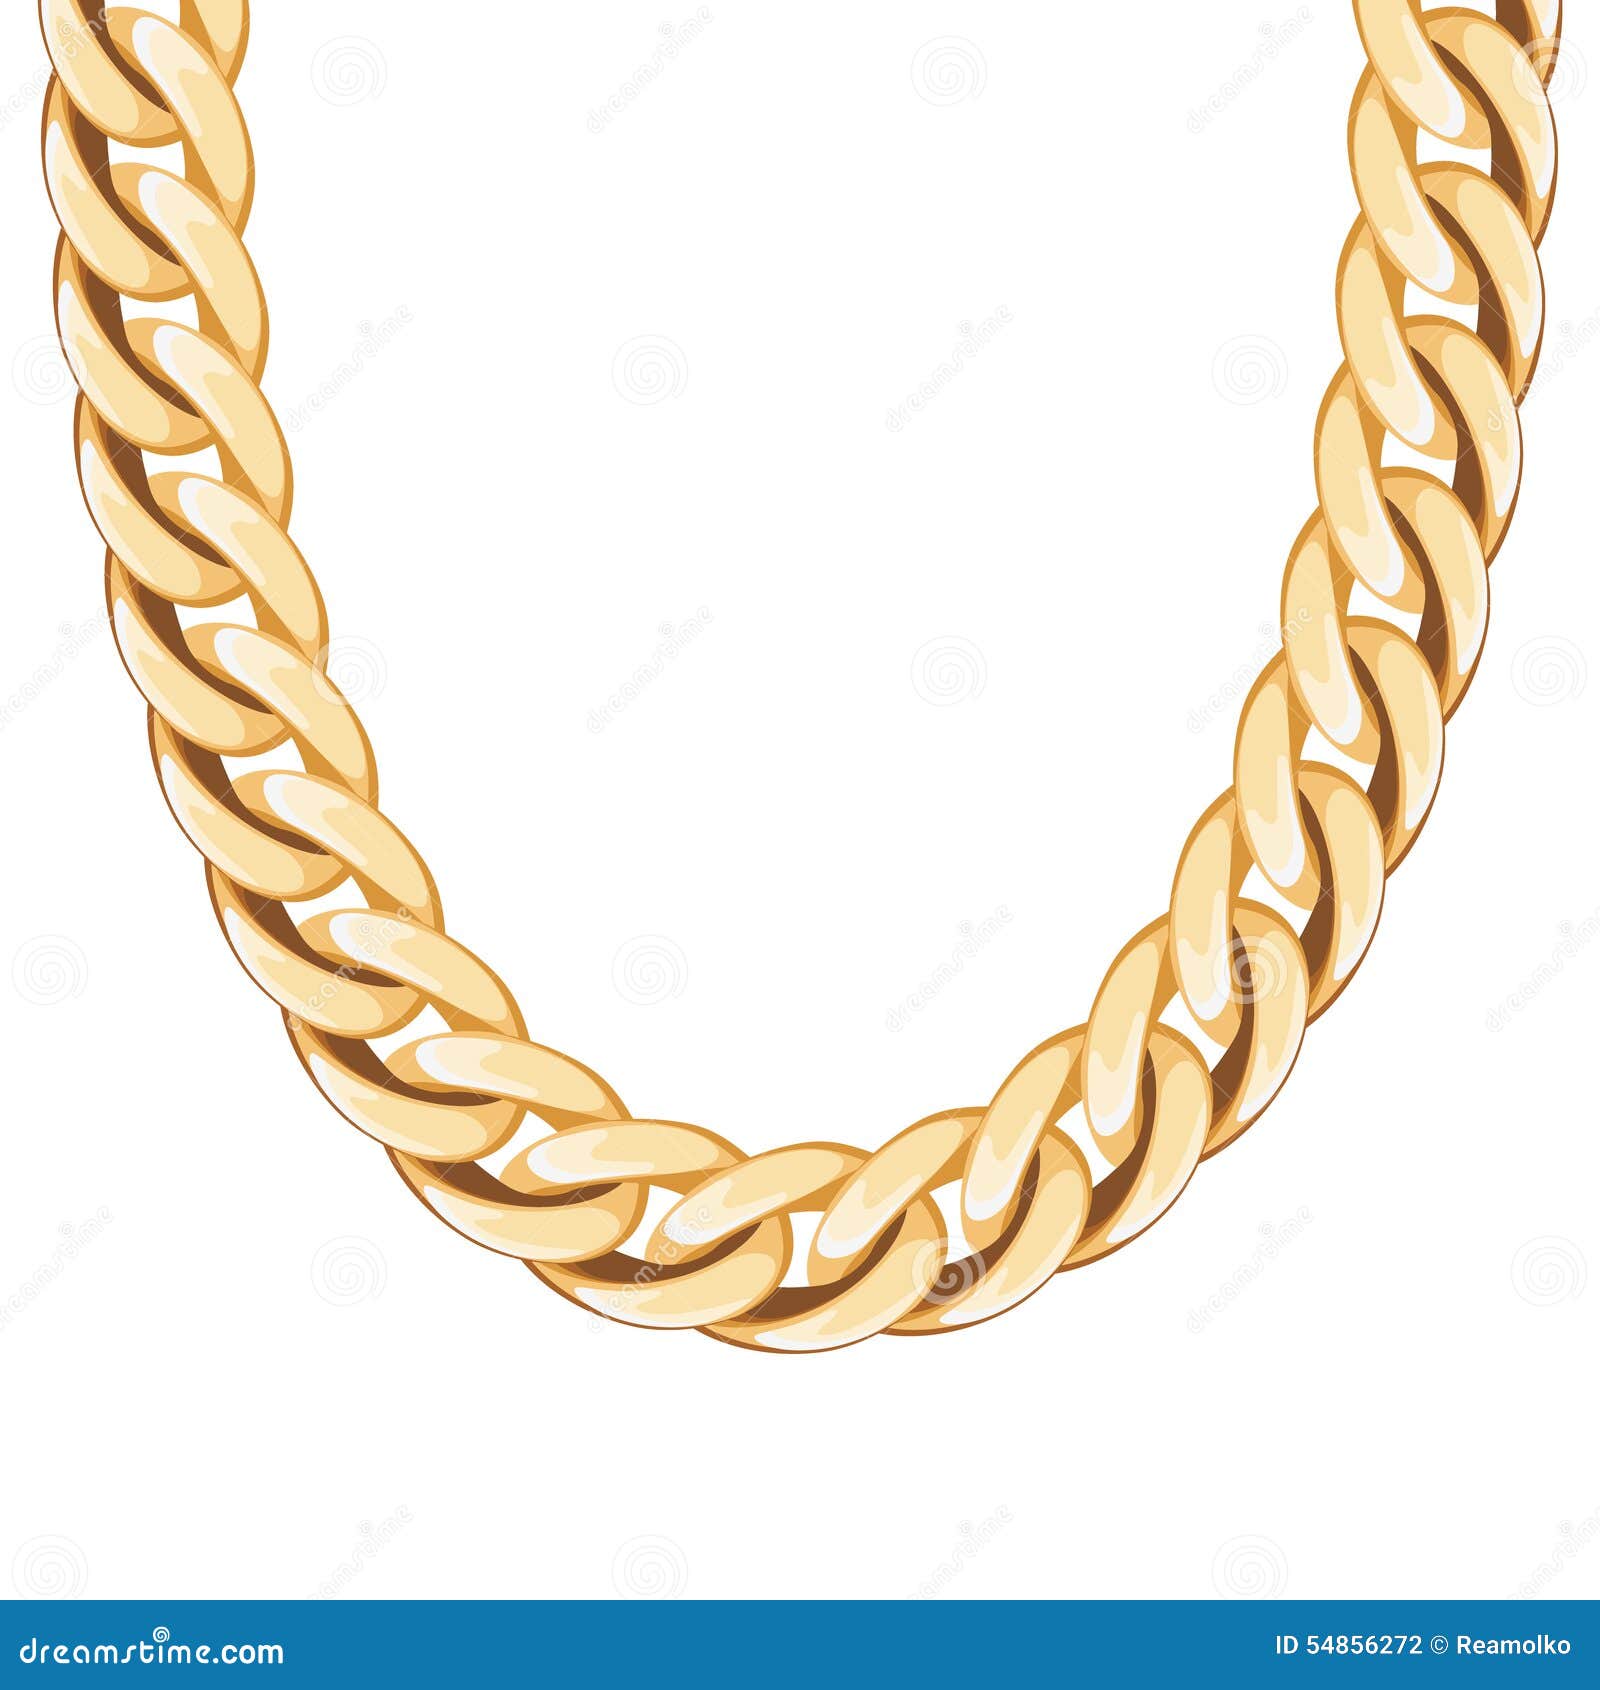 chunky chain golden metallic necklace or bracelet